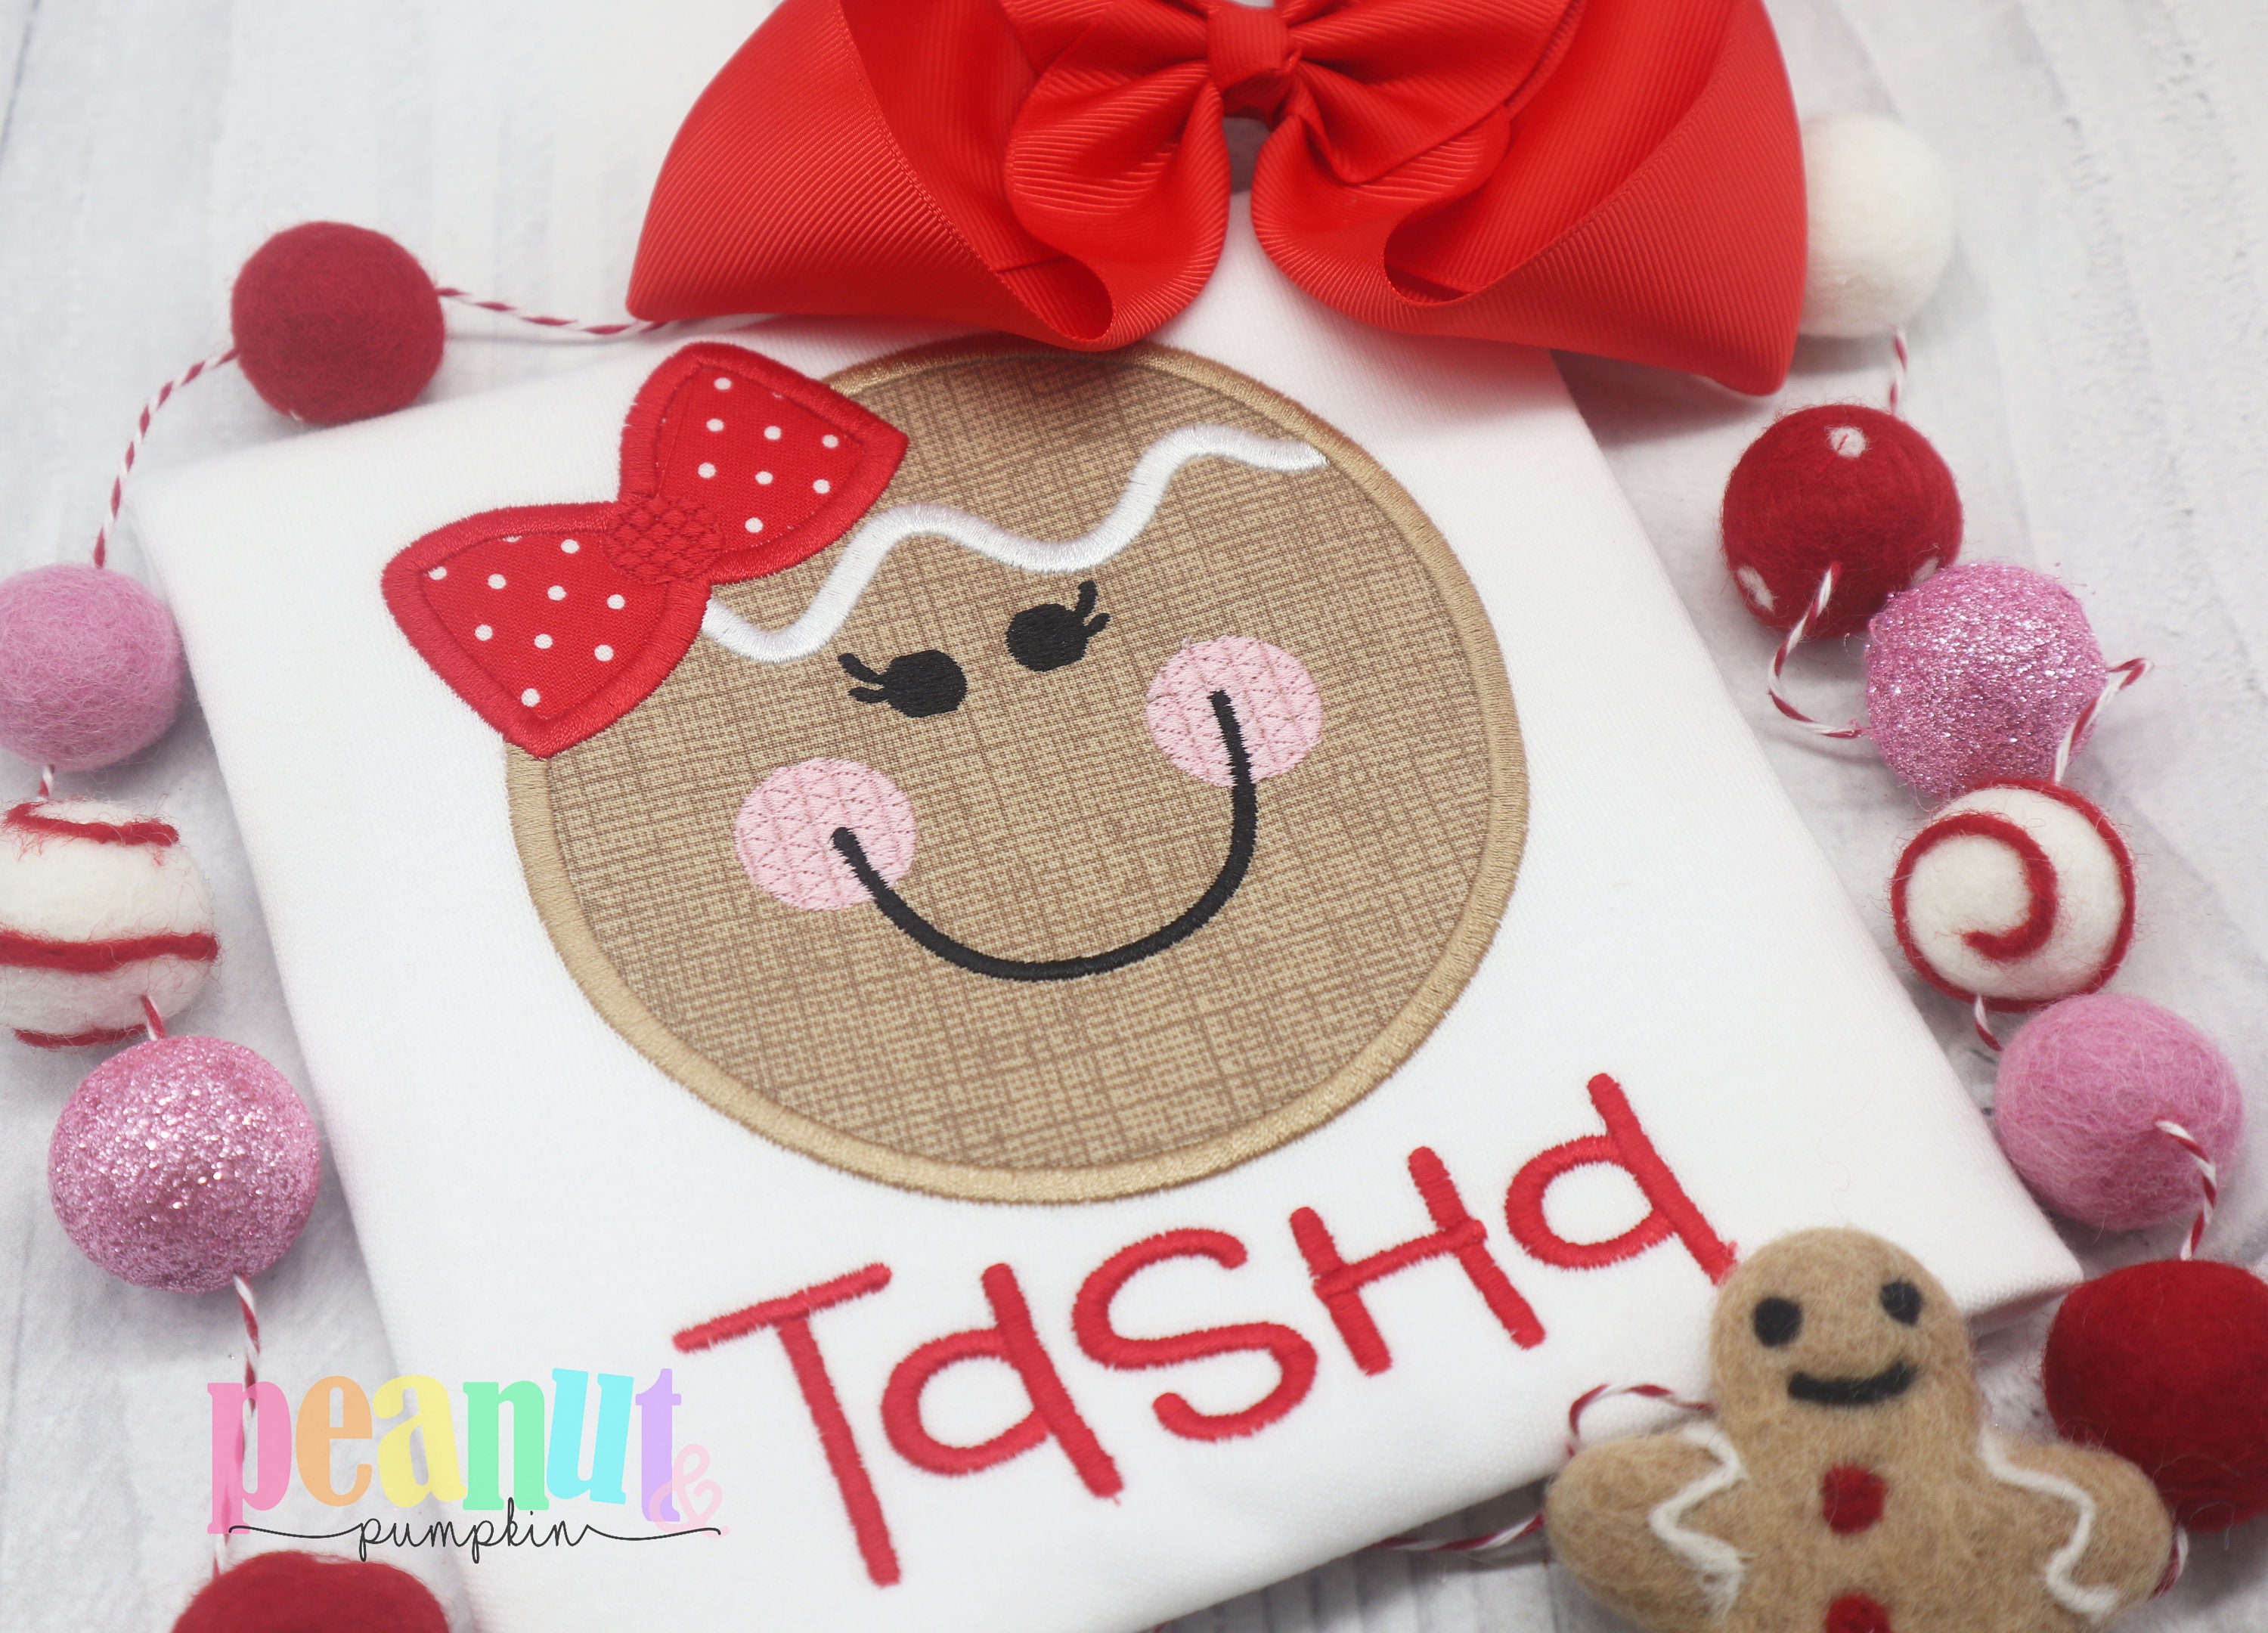 40cm/16" Record a 20 Second Personalized Message in a Gingerbread Girl 